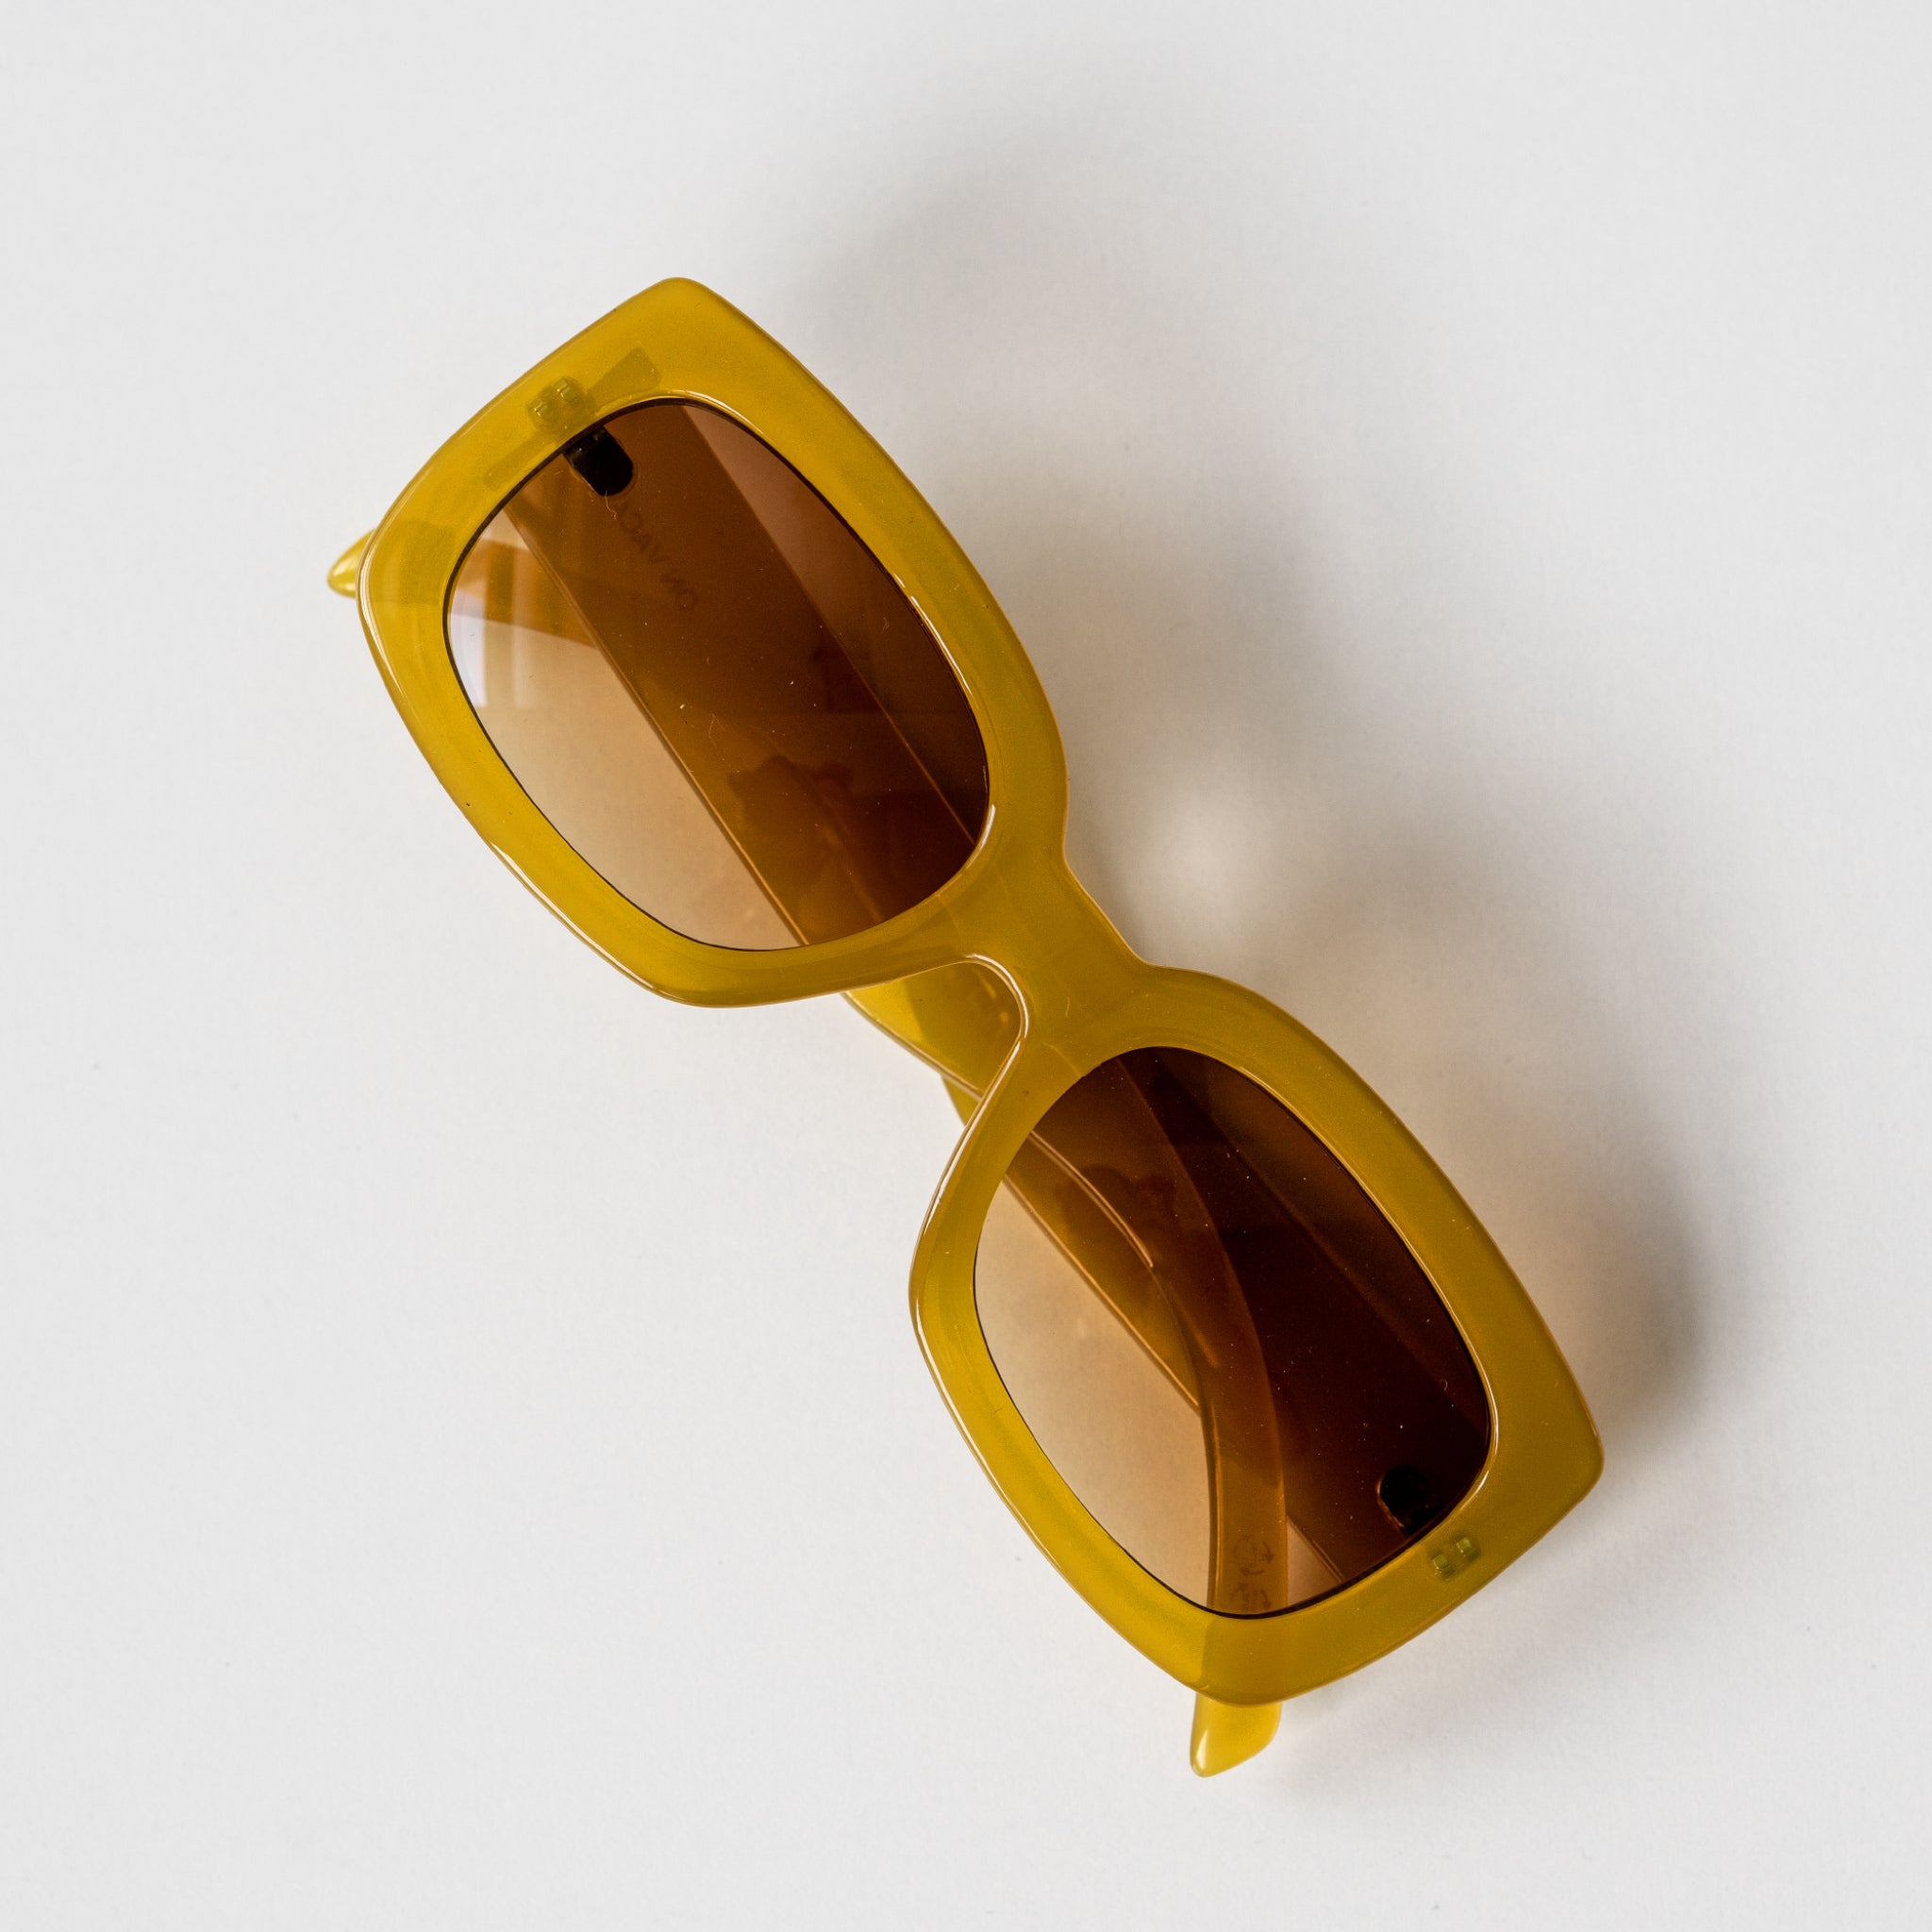 On Vacation Retro Sonnenbrille "Chunky"